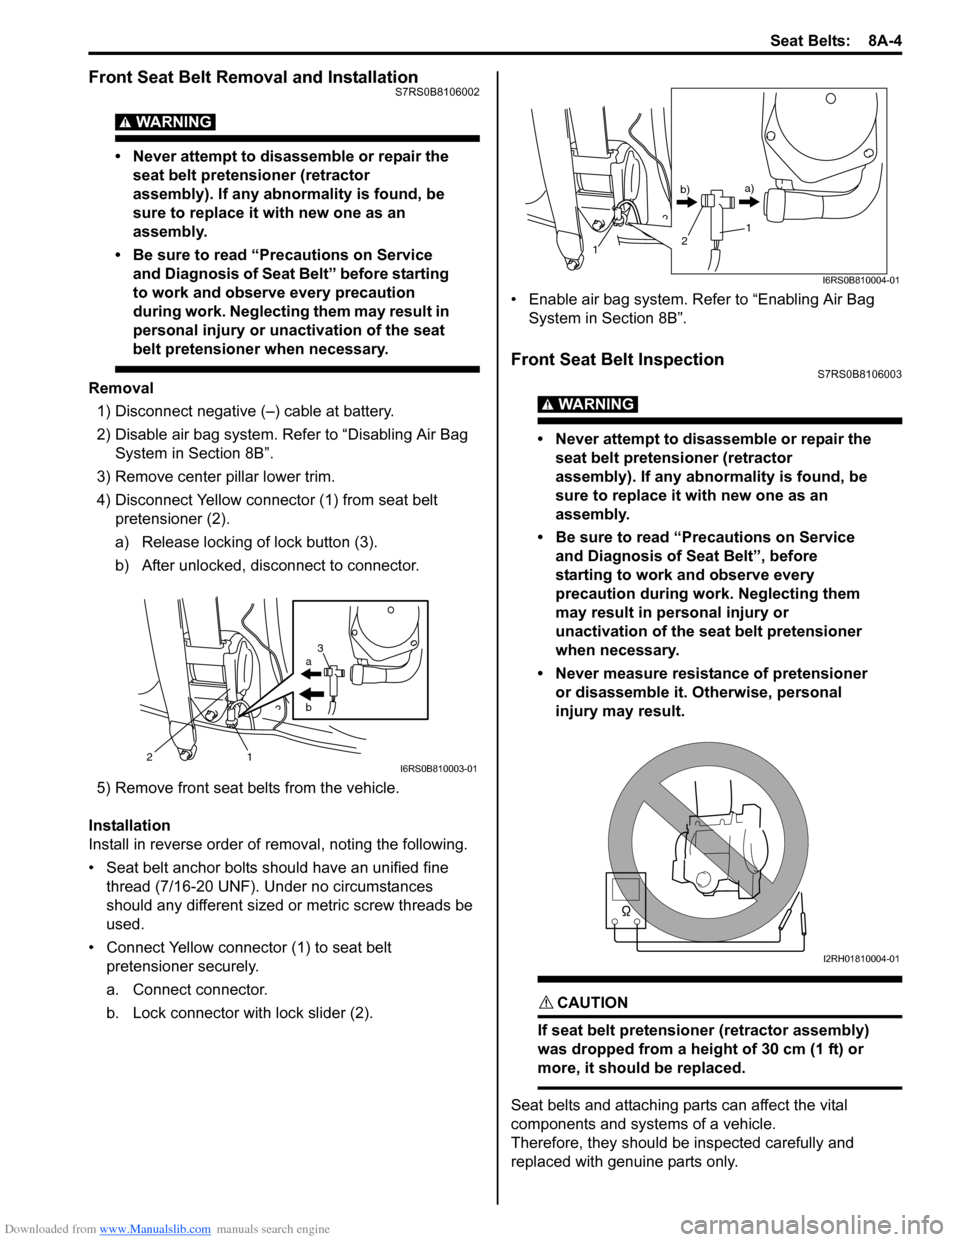 SUZUKI SWIFT 2006 2.G Service Workshop Manual Downloaded from www.Manualslib.com manuals search engine Seat Belts:  8A-4
Front Seat Belt Removal and InstallationS7RS0B8106002
WARNING! 
• Never attempt to disassemble or repair the seat belt pret